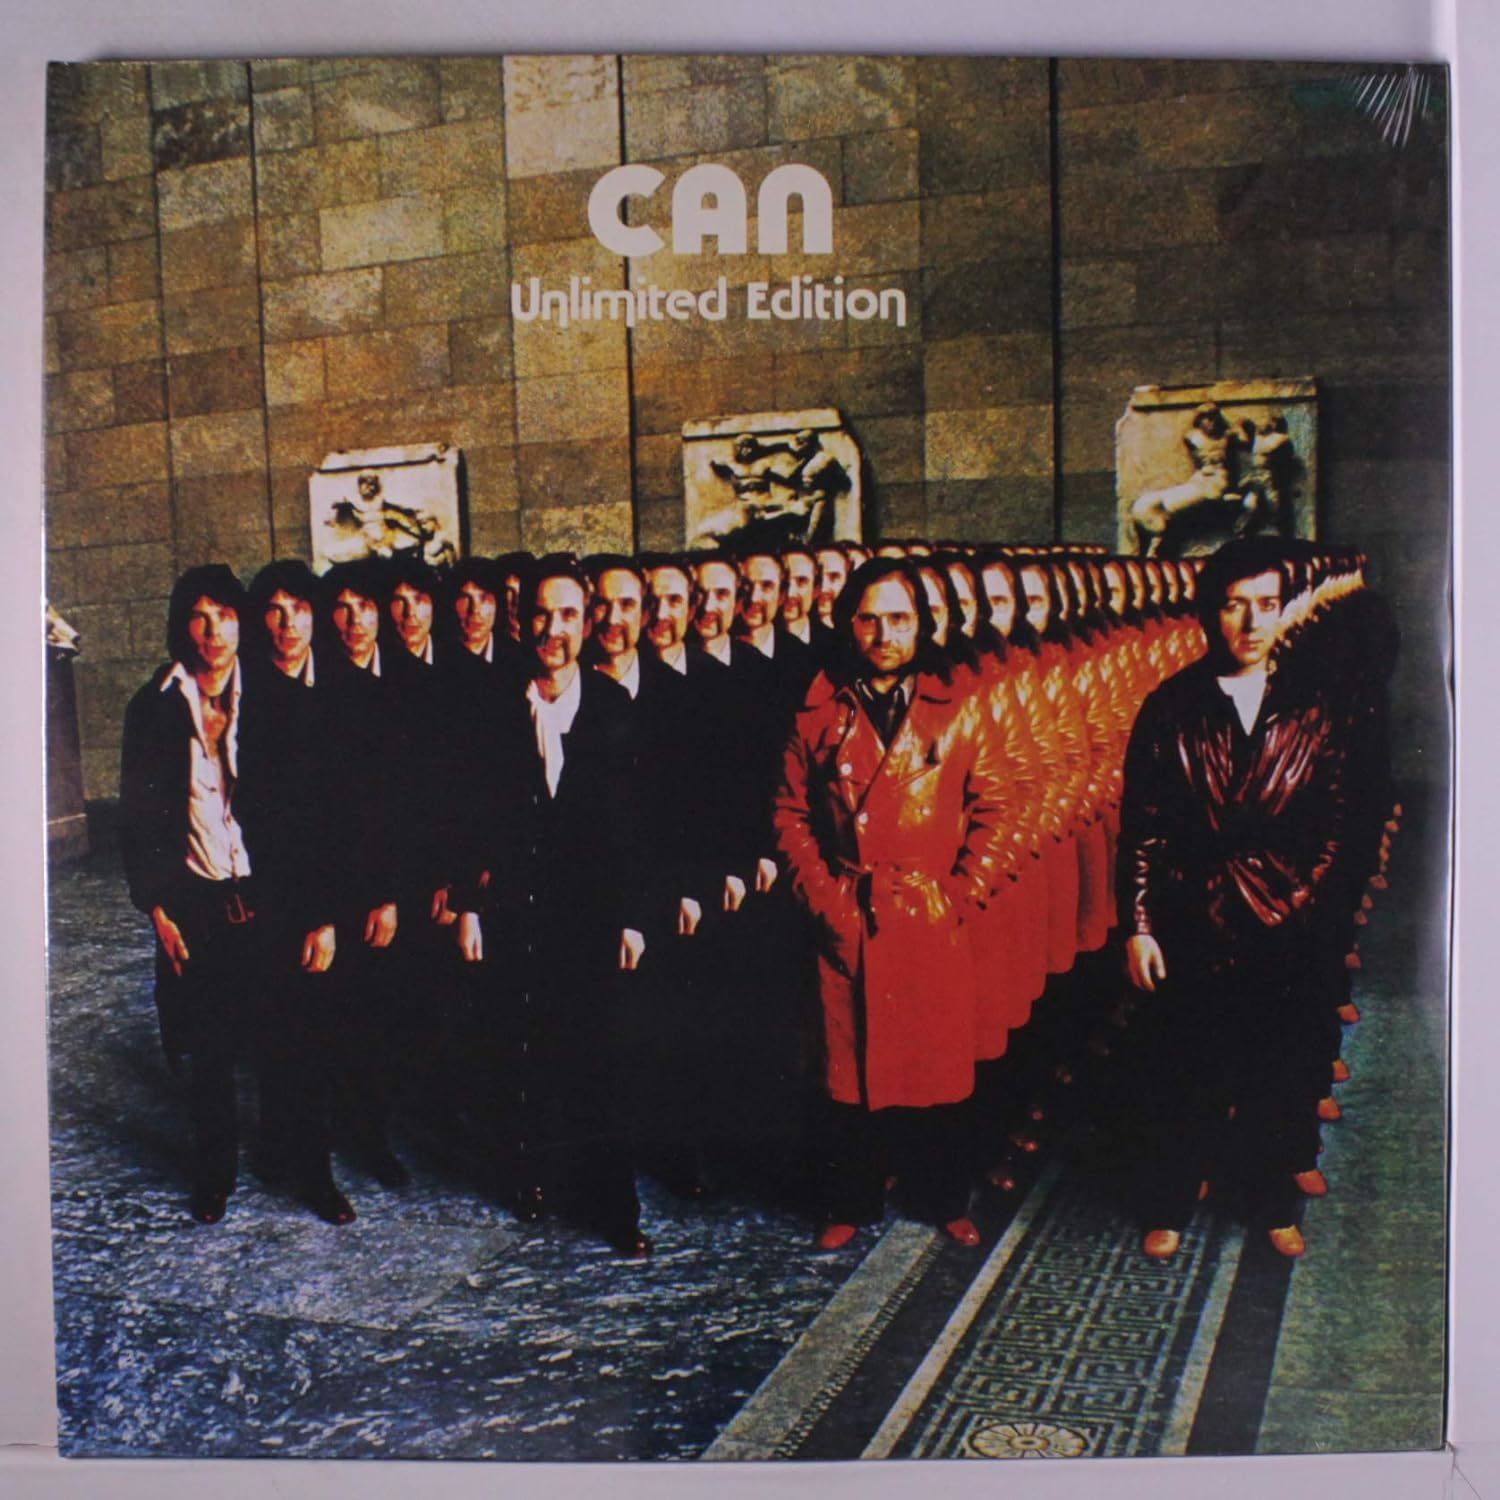 CAN - UNLIMITED EDITION (1976) - 2LP COMPILATION 2014 EDITION SIFIR PLAK